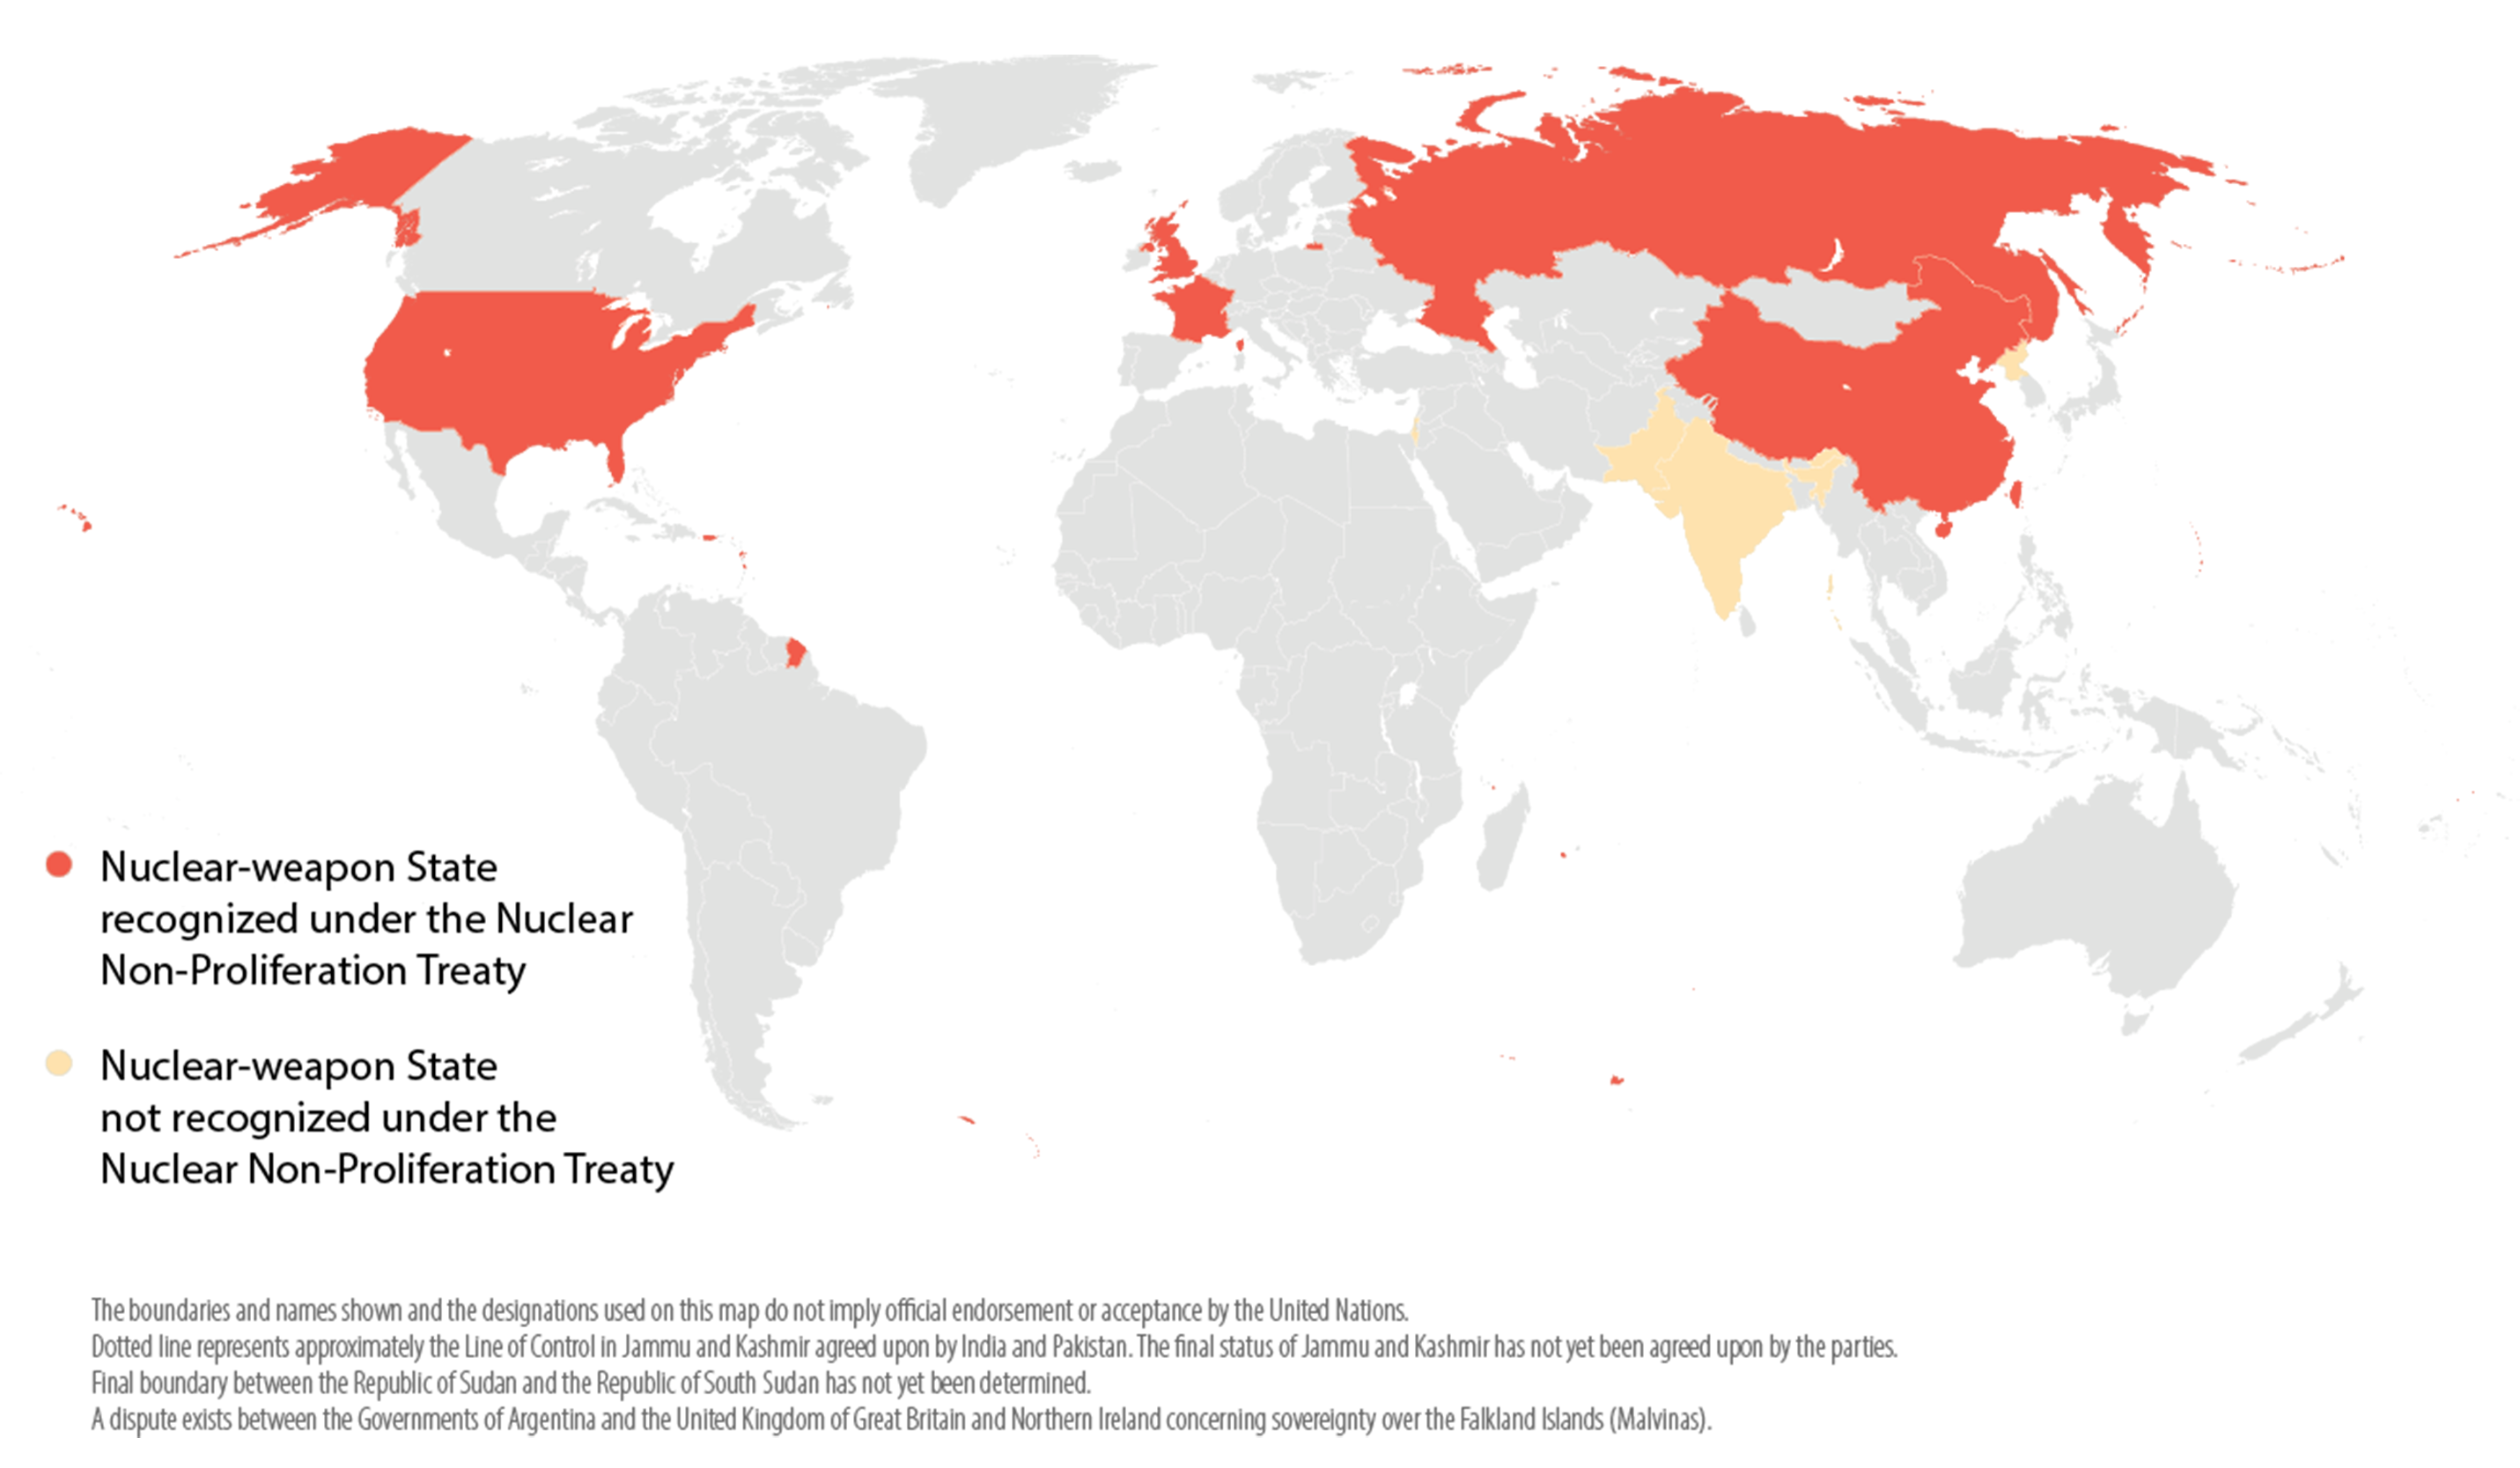 World map highlighting countries with nuclear modernization programmes